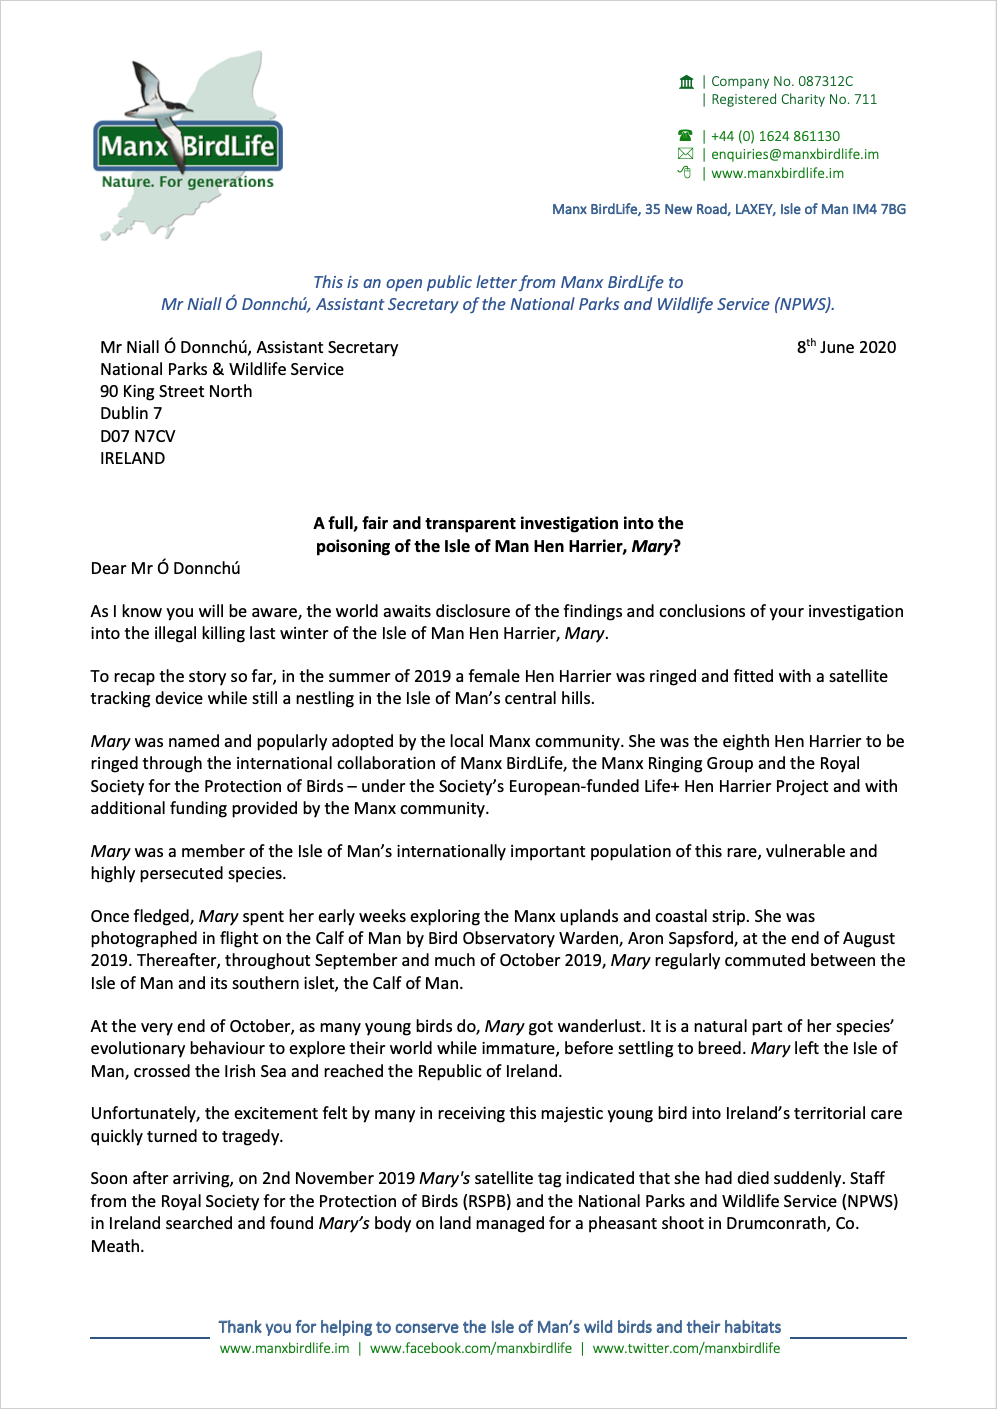 Open public letter to Mr Niall Ó Donnchú NWPS re the illegal poisoning of Mary page 1